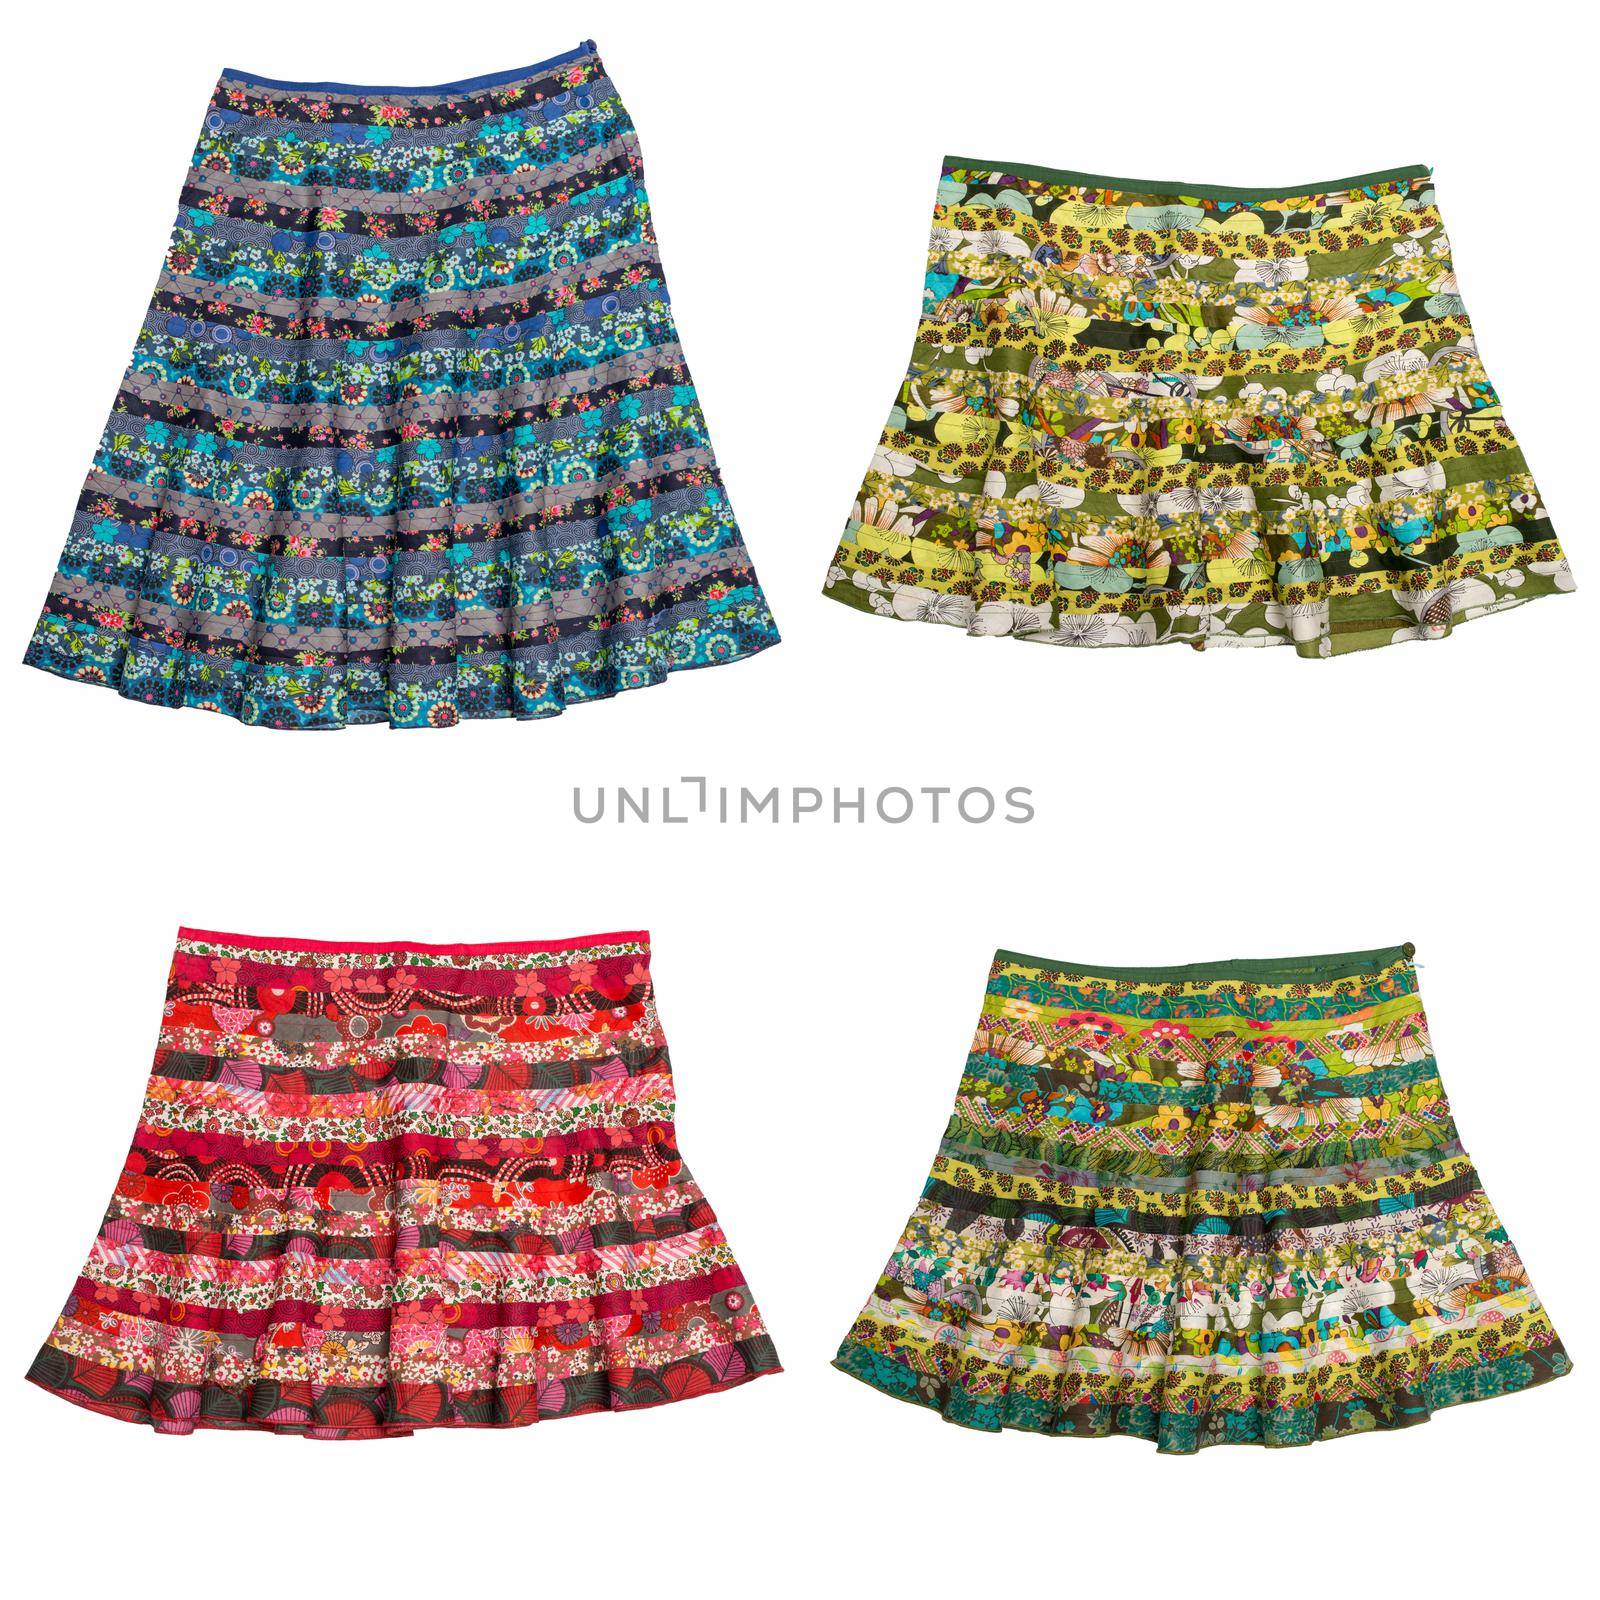 Colorful indian style patchwork skirts isolated on white background.